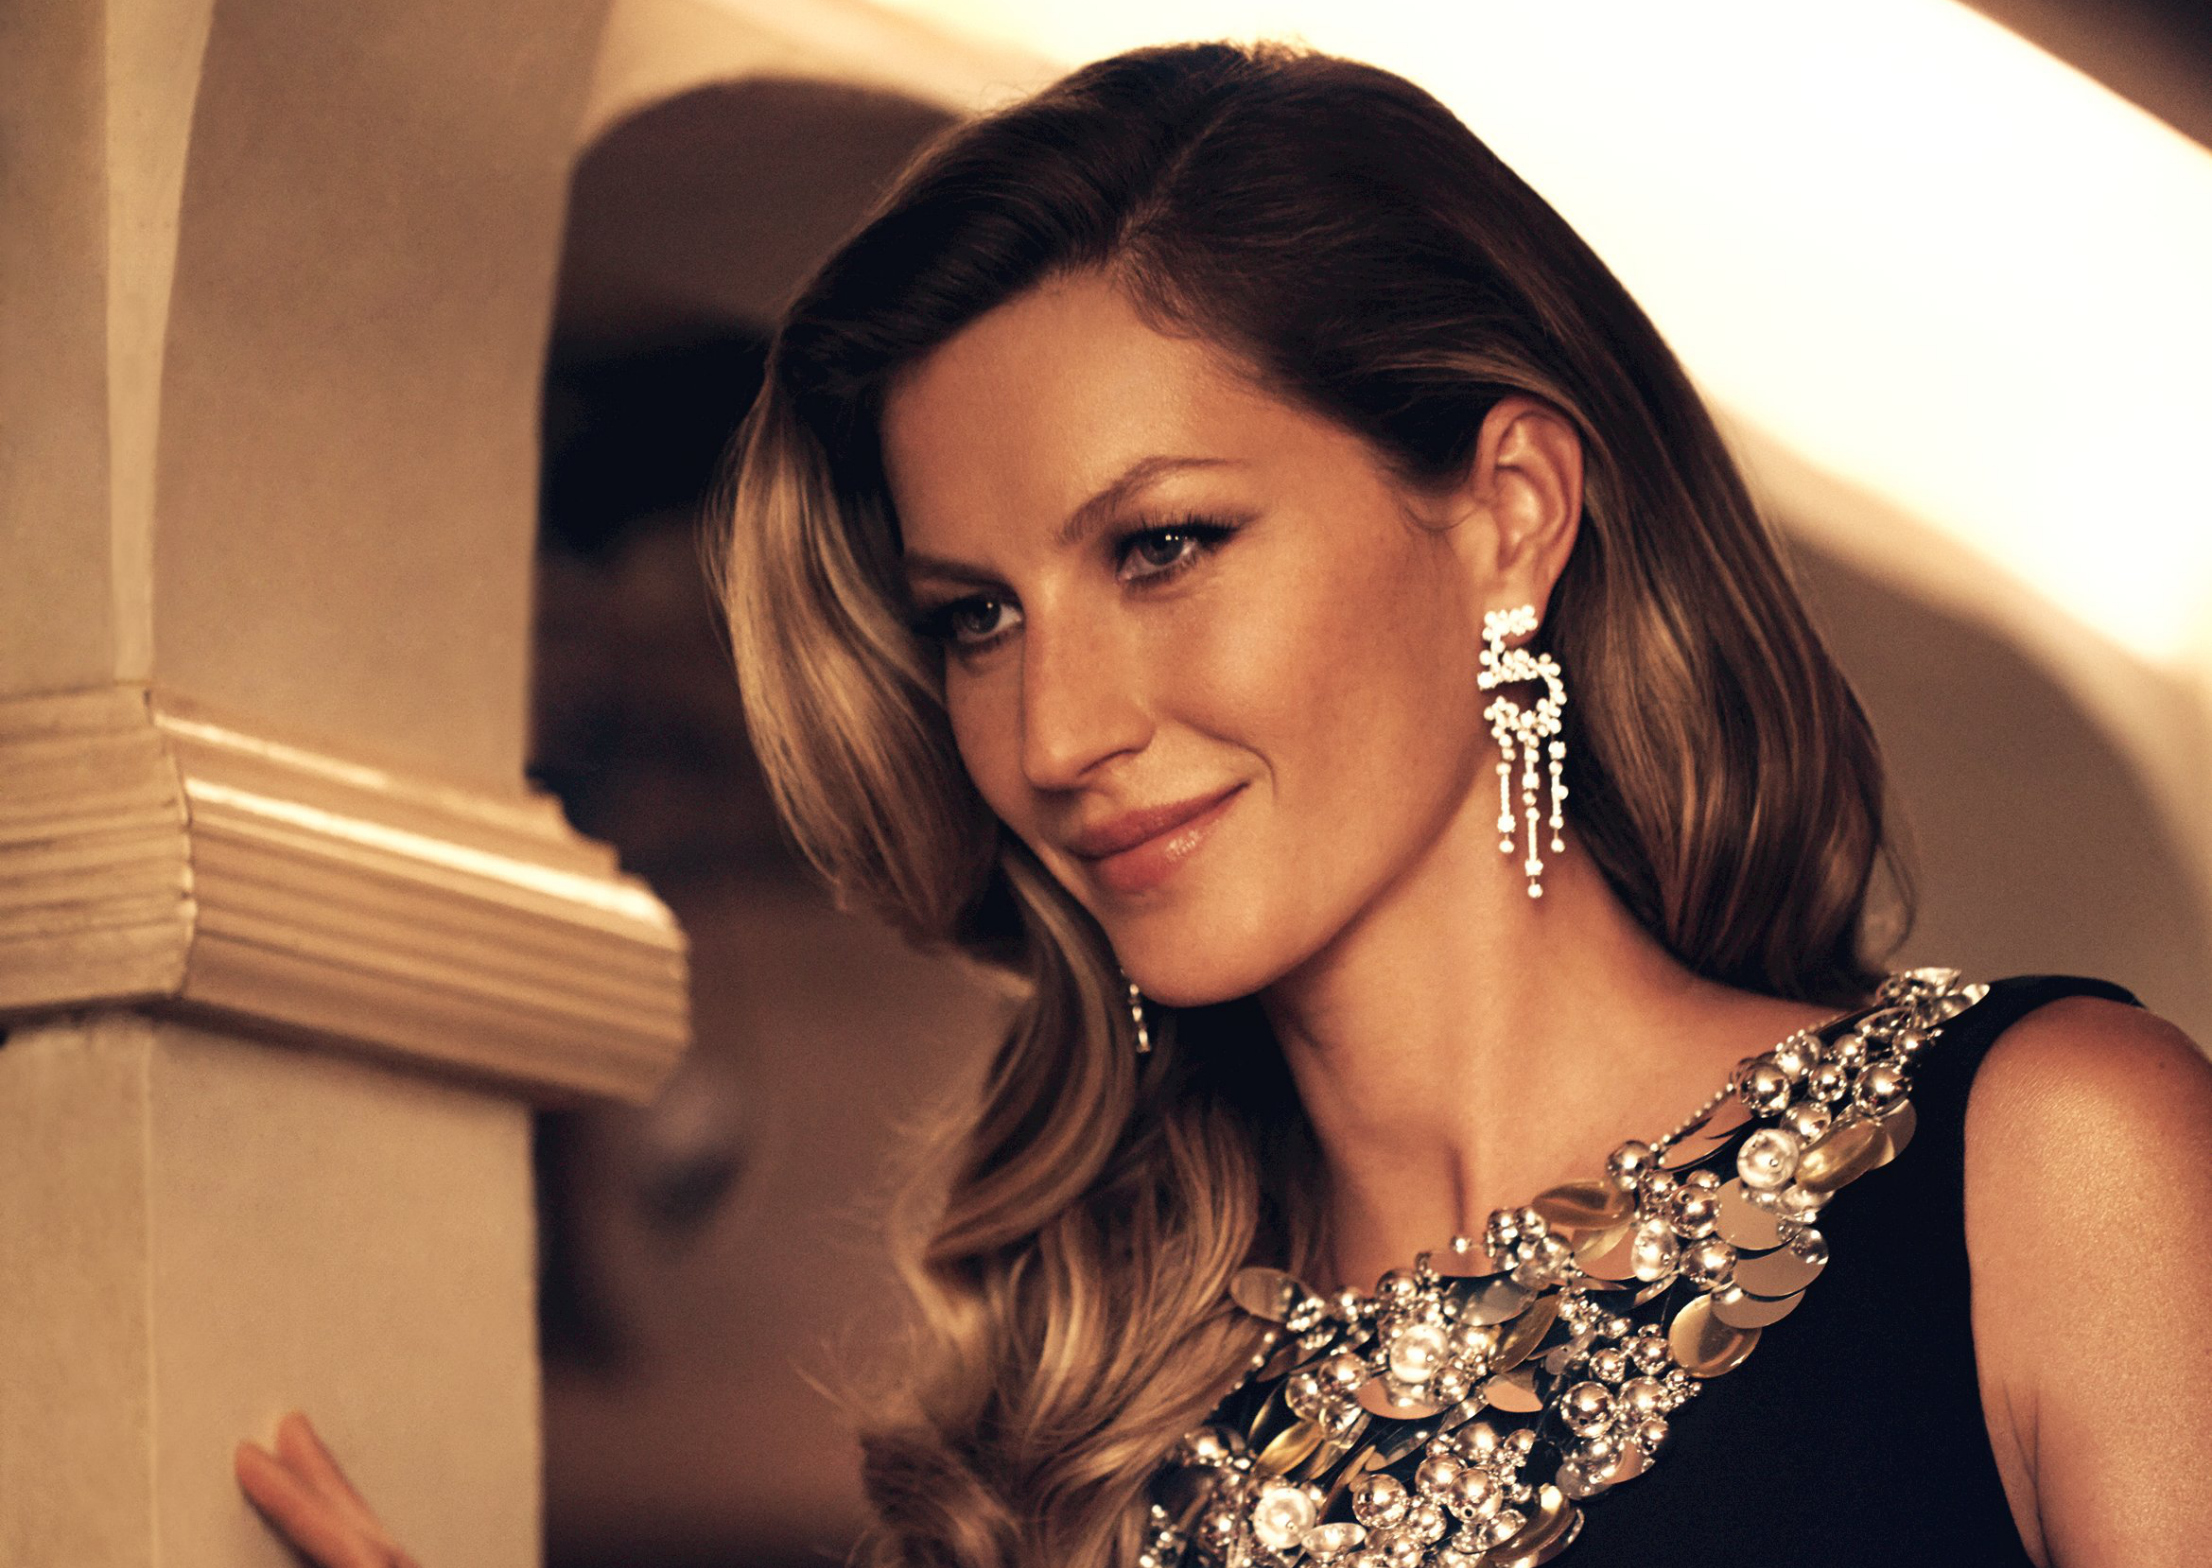 Video: Gisele For Chanel